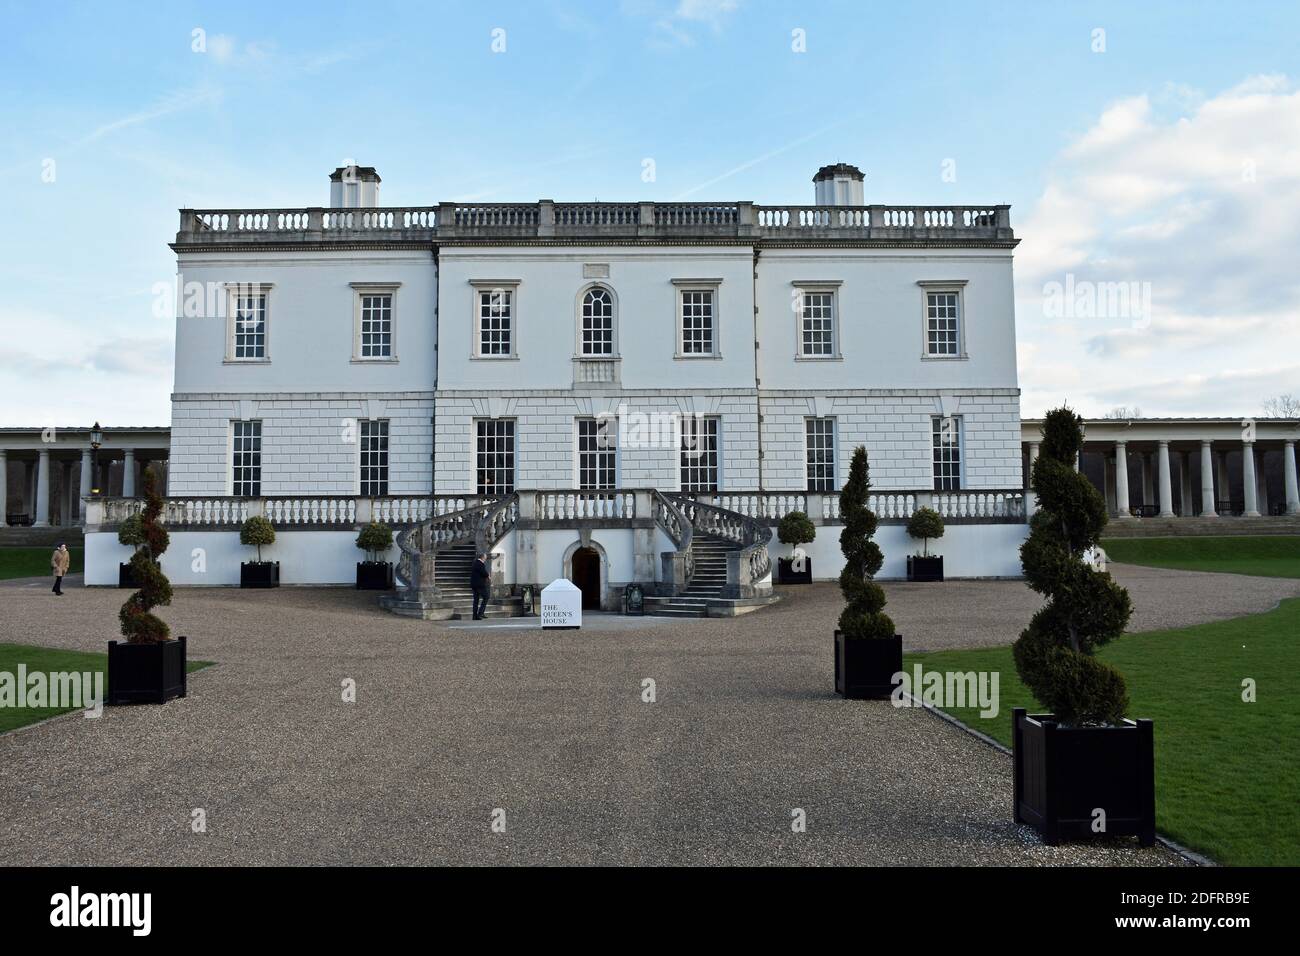 The Queens House, a former royal residence in Greenwich Park, London.   Two staircases lead the way to a raised terrace. A visitor stands outside. Stock Photo